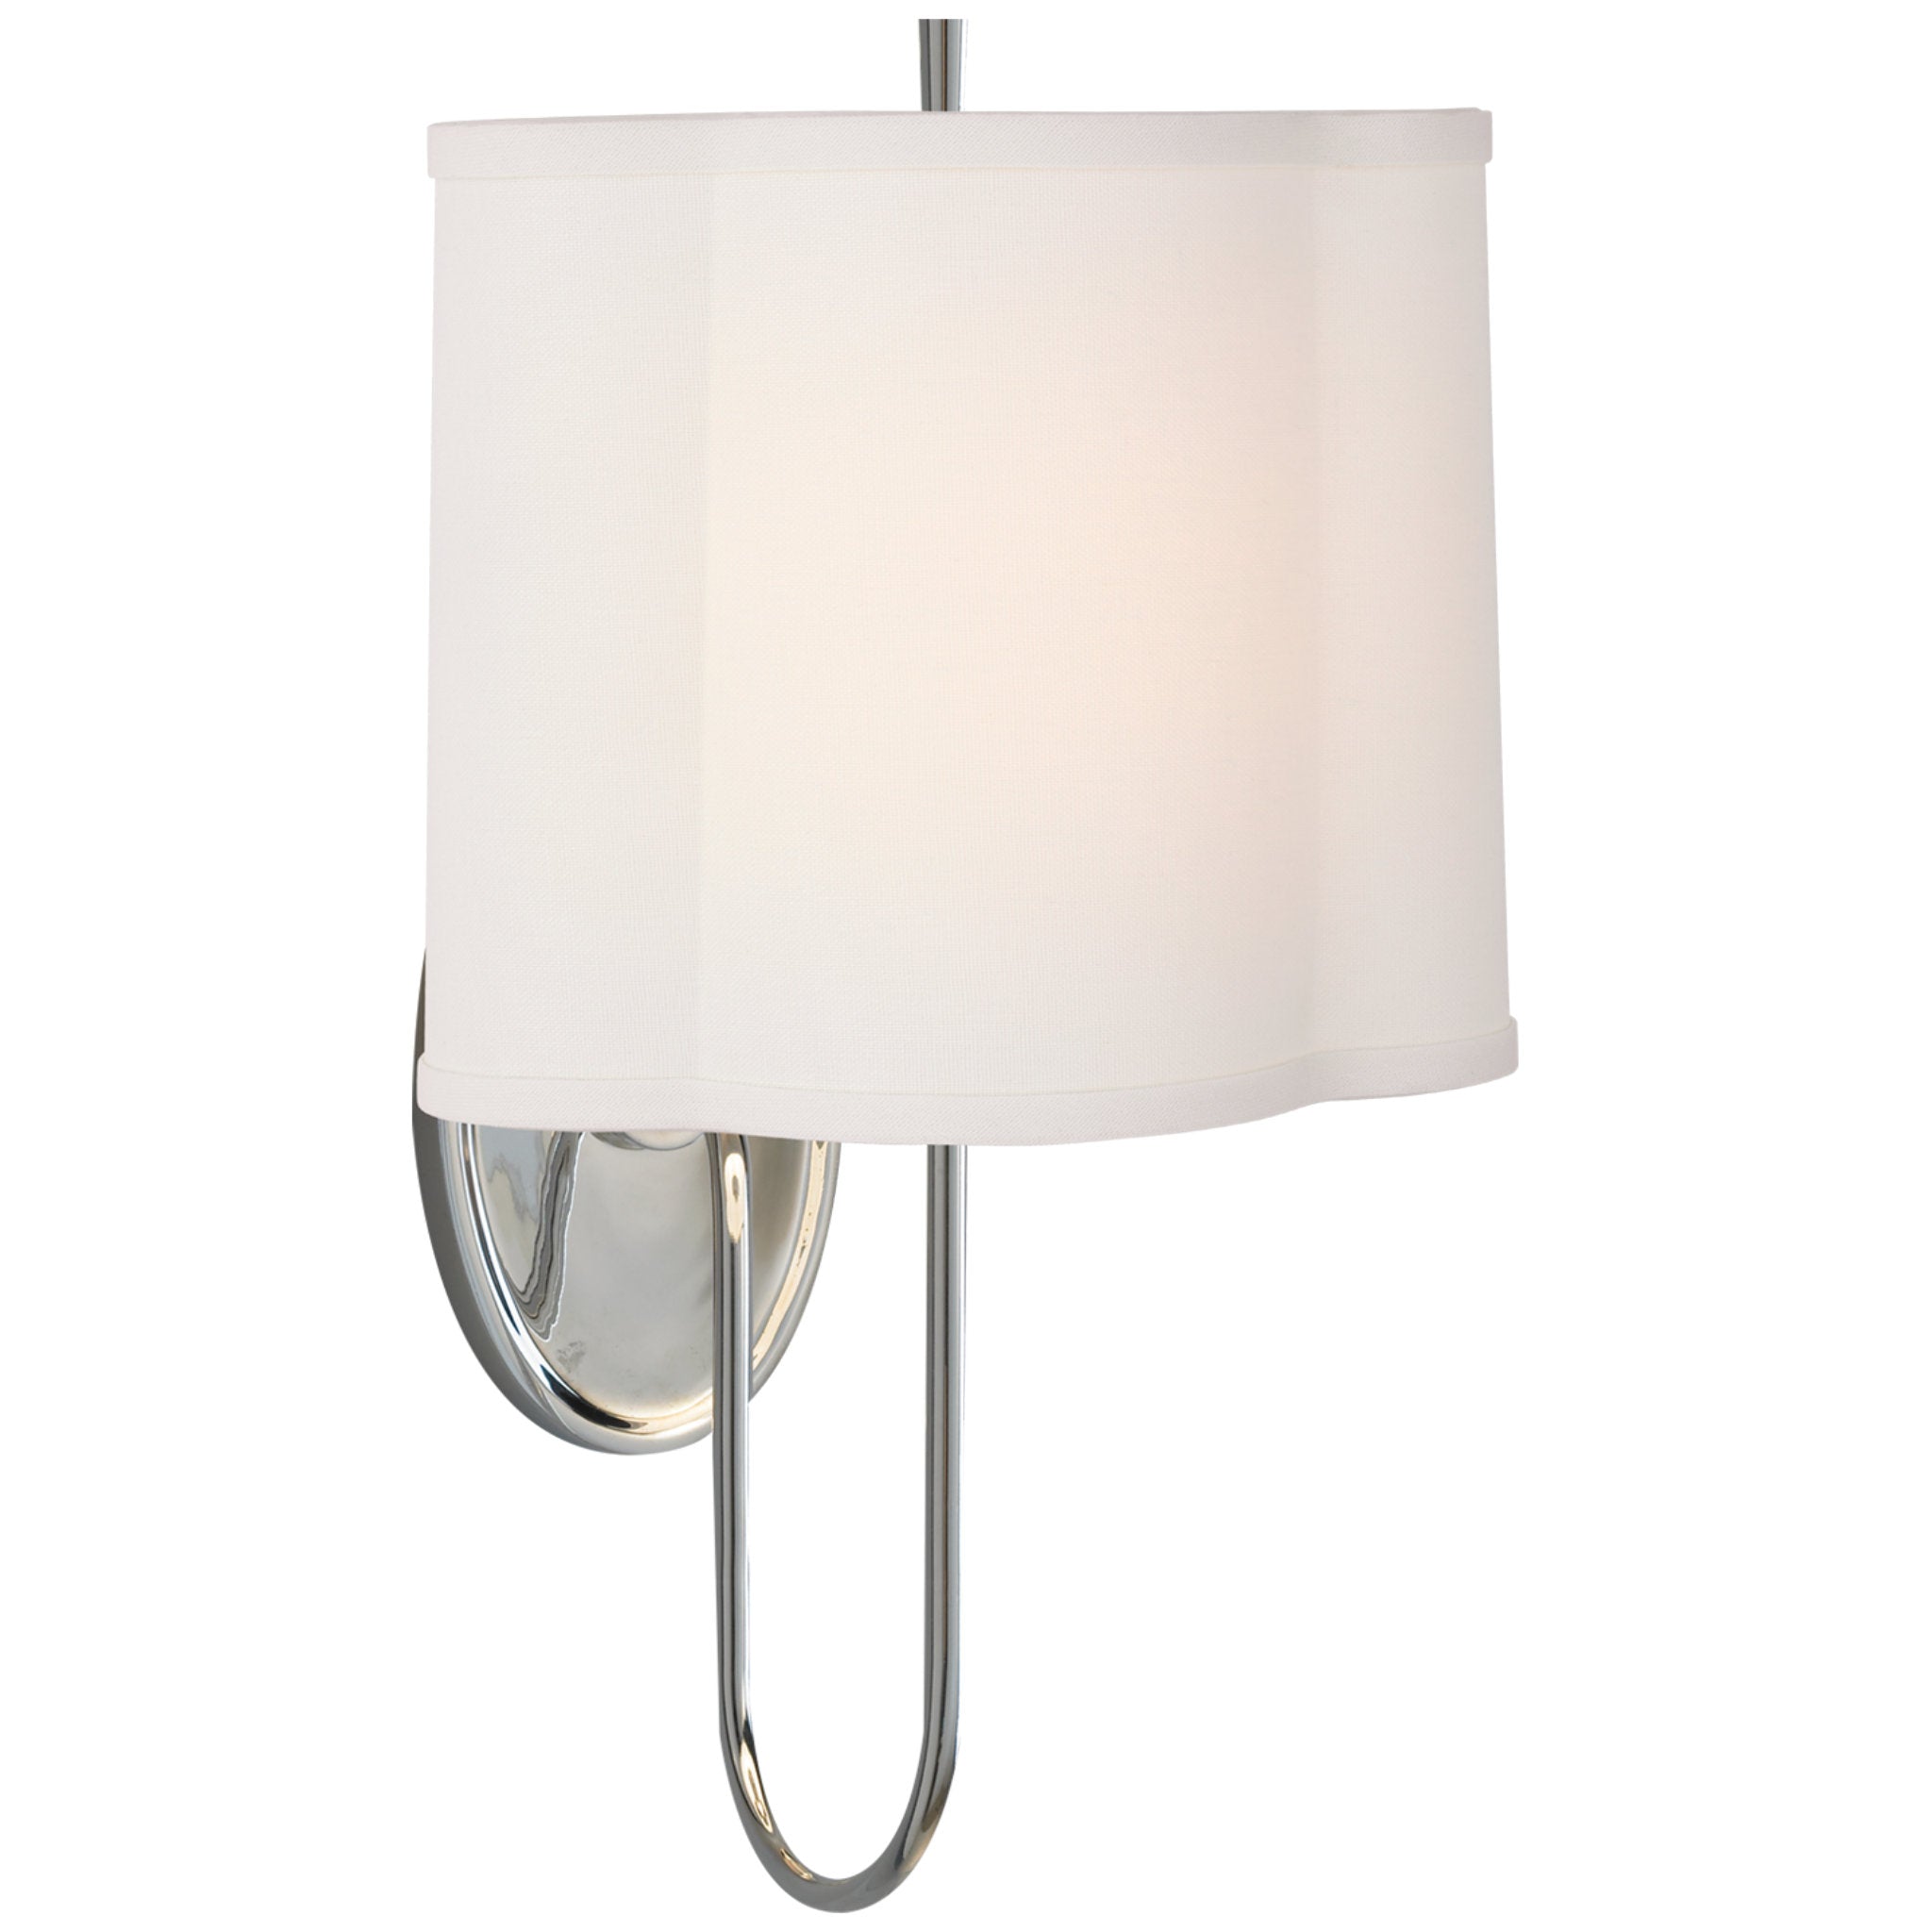 Barbara Barry Simple Scallop Wall Sconce in Soft Silver with Linen Shade